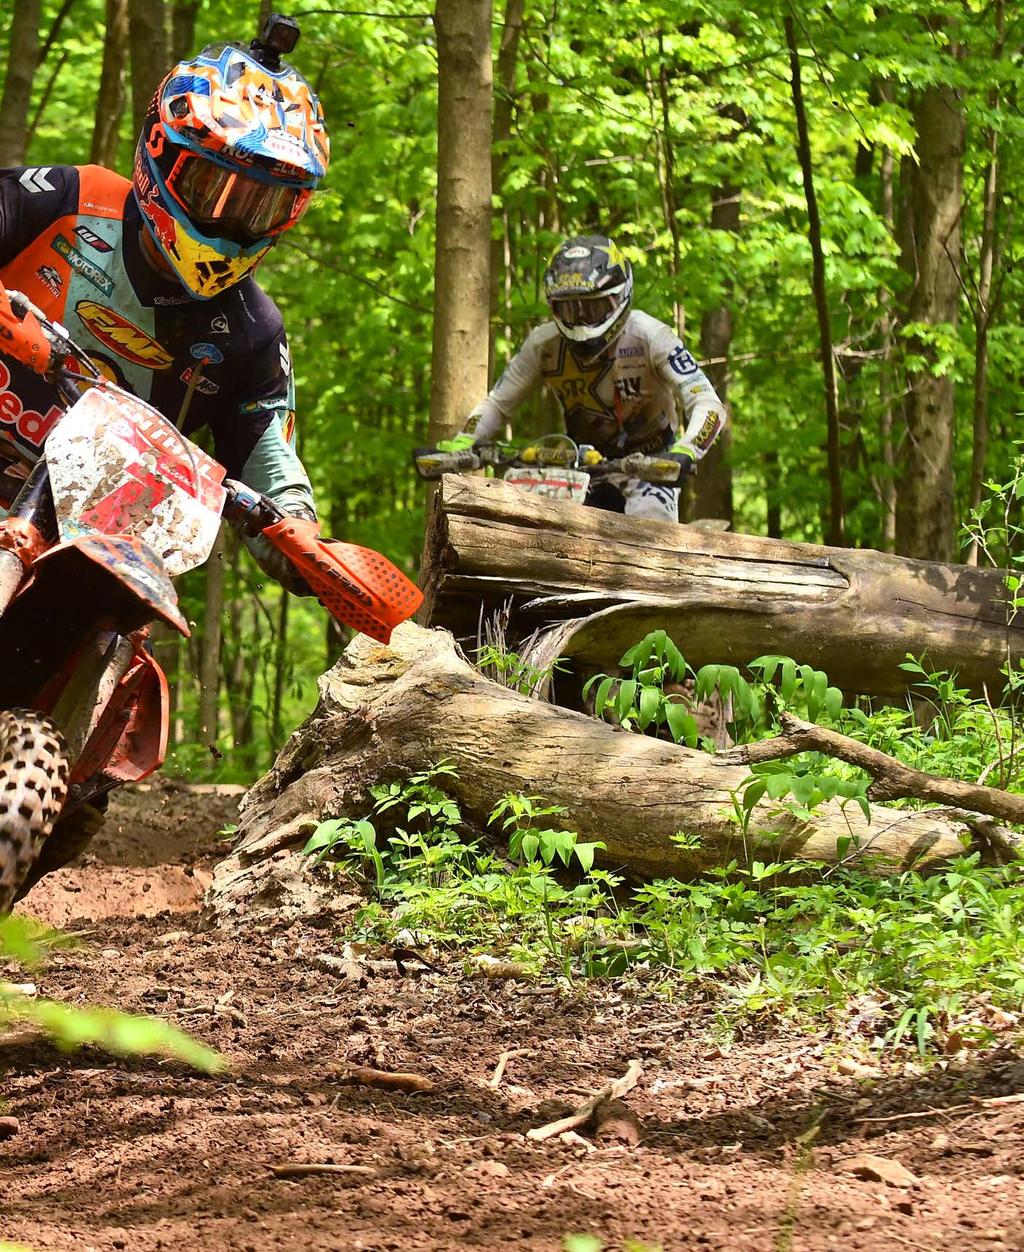 VOL. 55 ISSUE 19 MAY 15, 2018 P77 Kailub Russell (1) leads Thad Duvall through the woods late in the race.